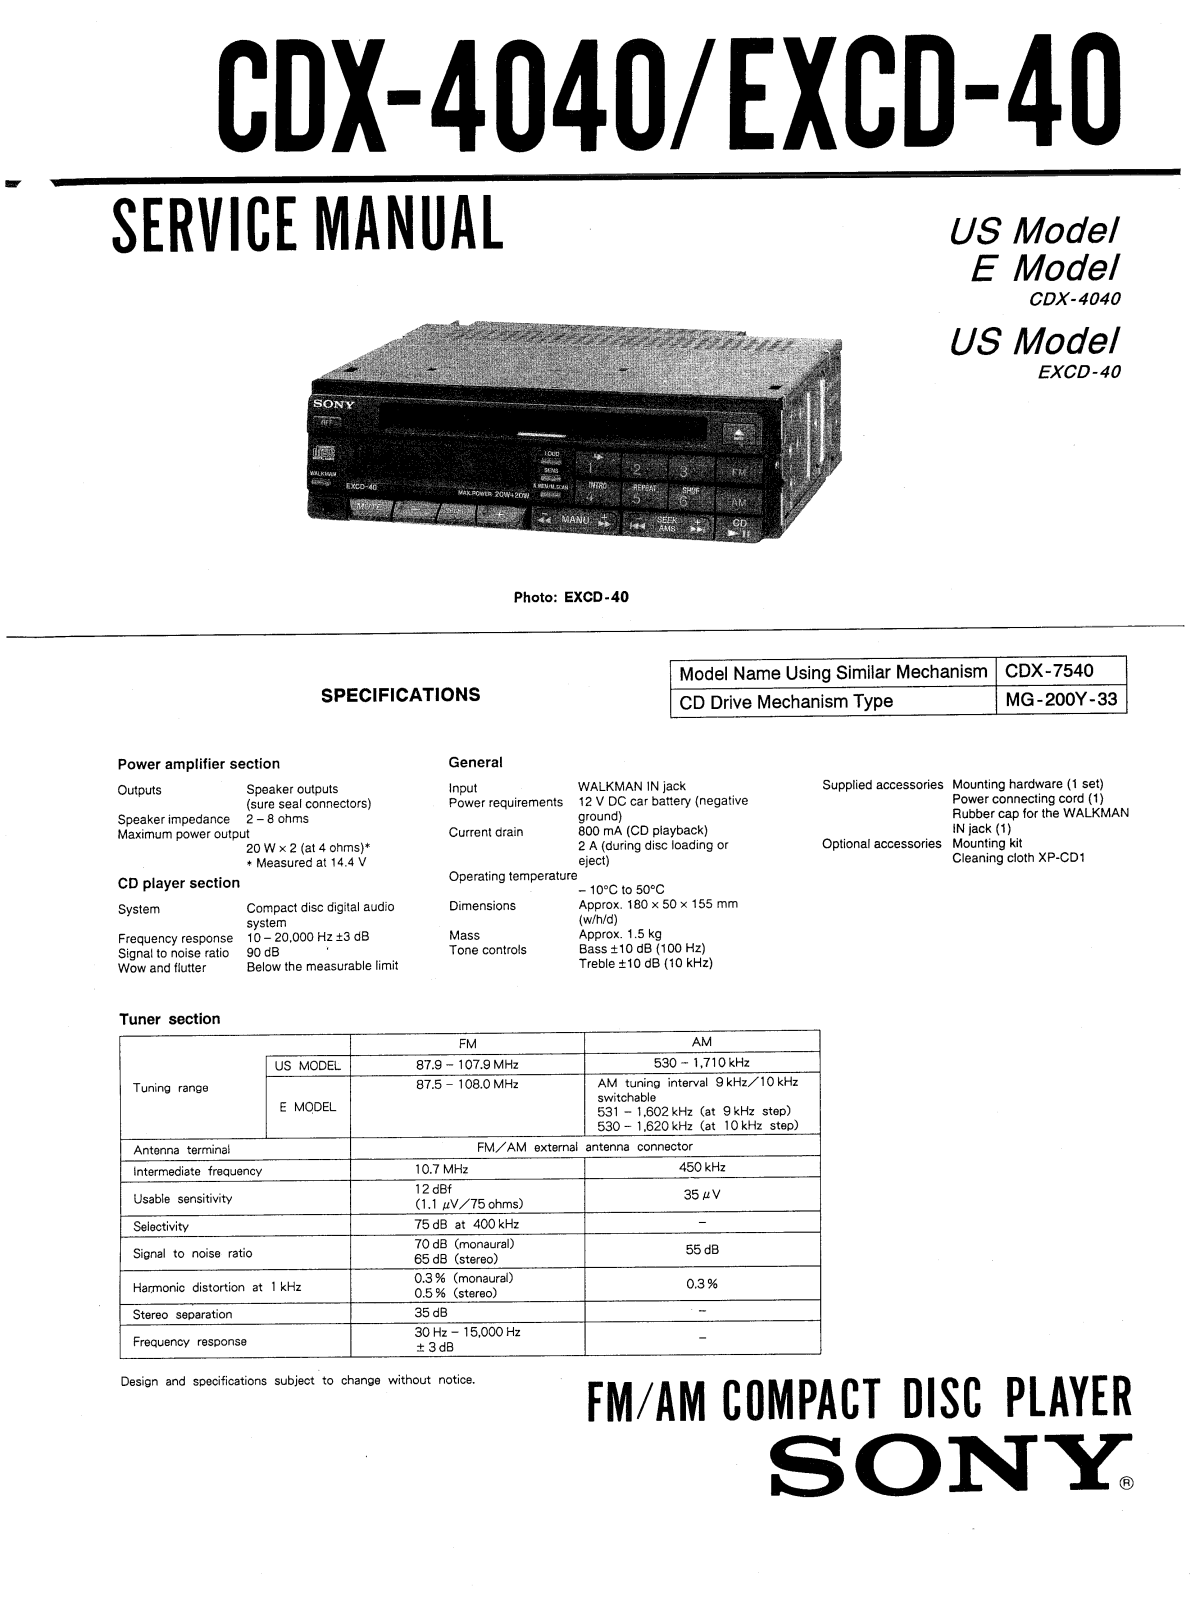 Sony CDX-EXCD-40 Service Manual